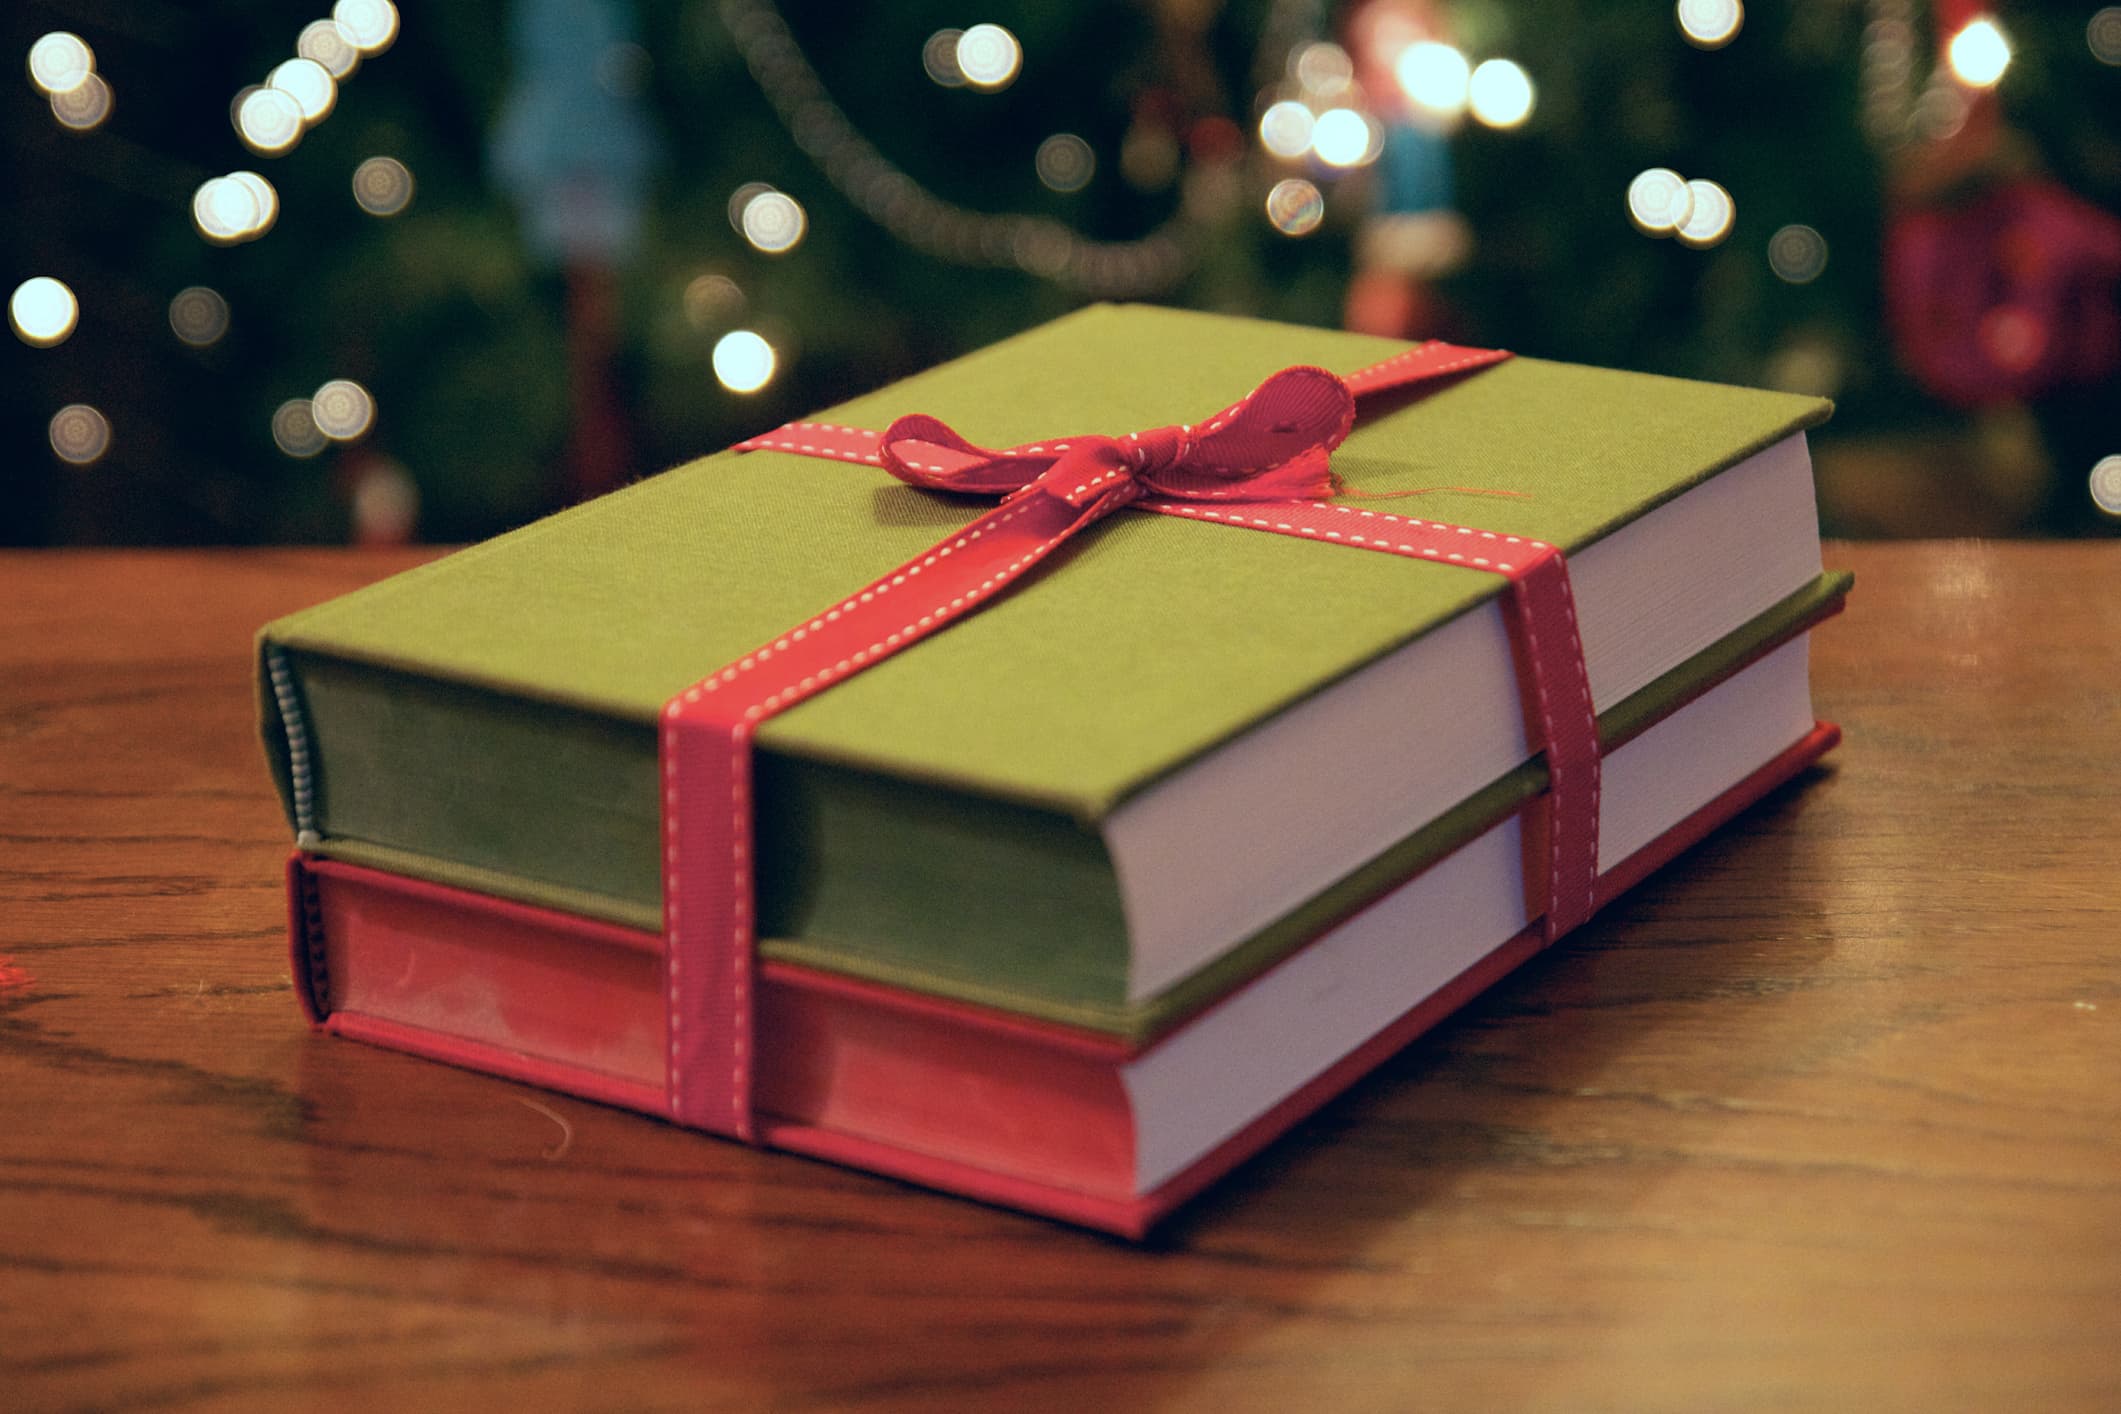 Want to gift books this holiday season? Here are 30 ideas for kids and adults | Here & Now